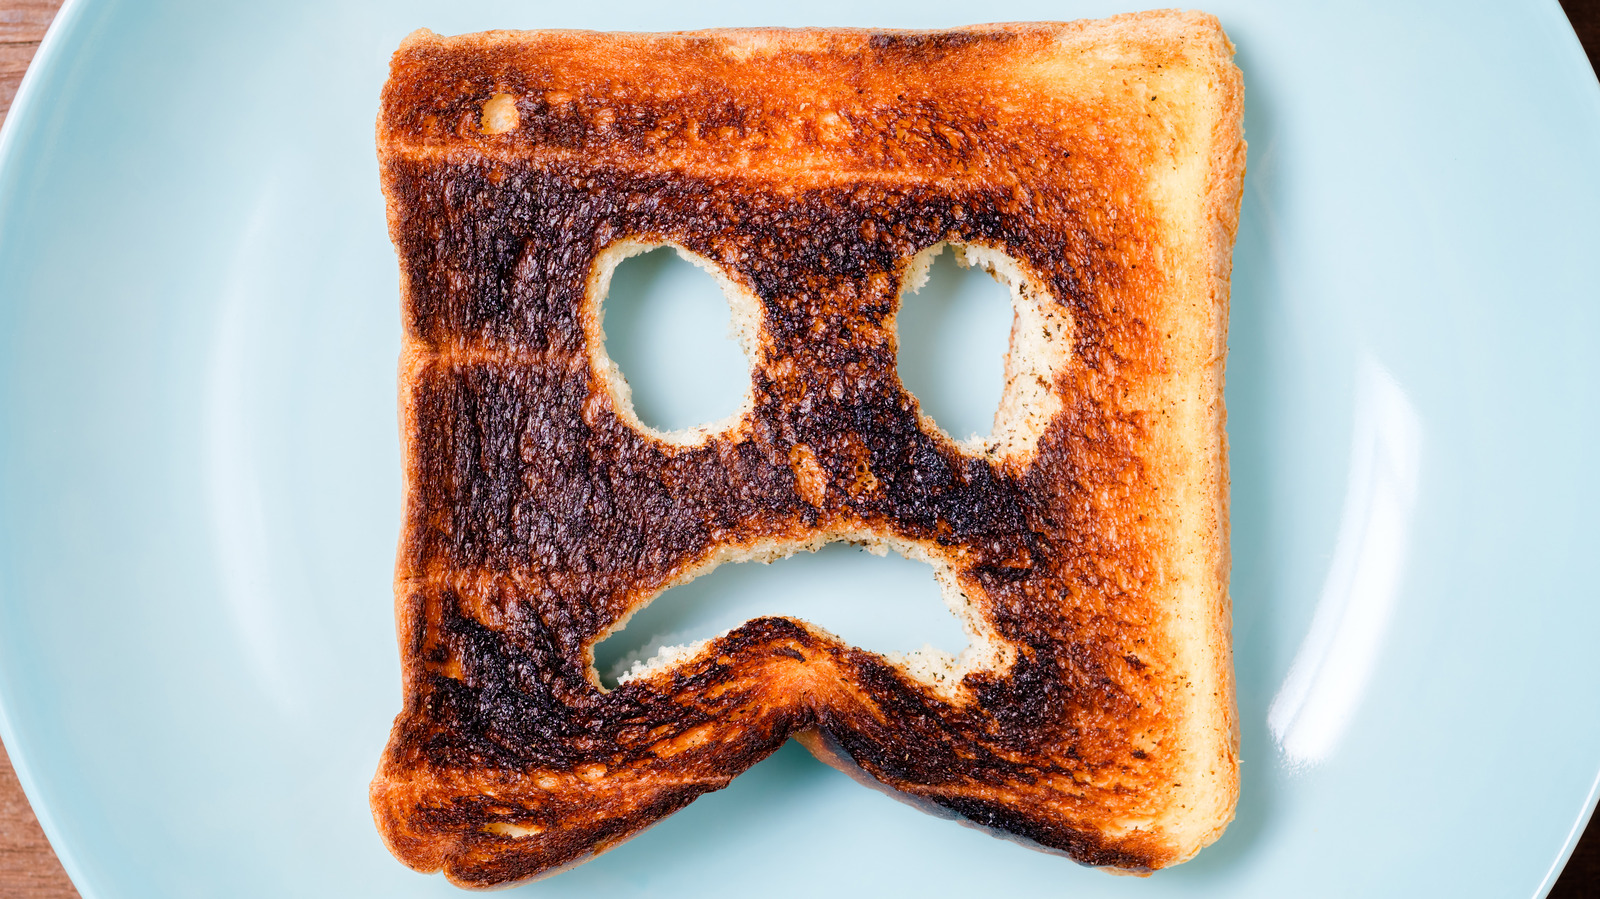 Should You Actually Be Concerned About Eating Burnt Toast?